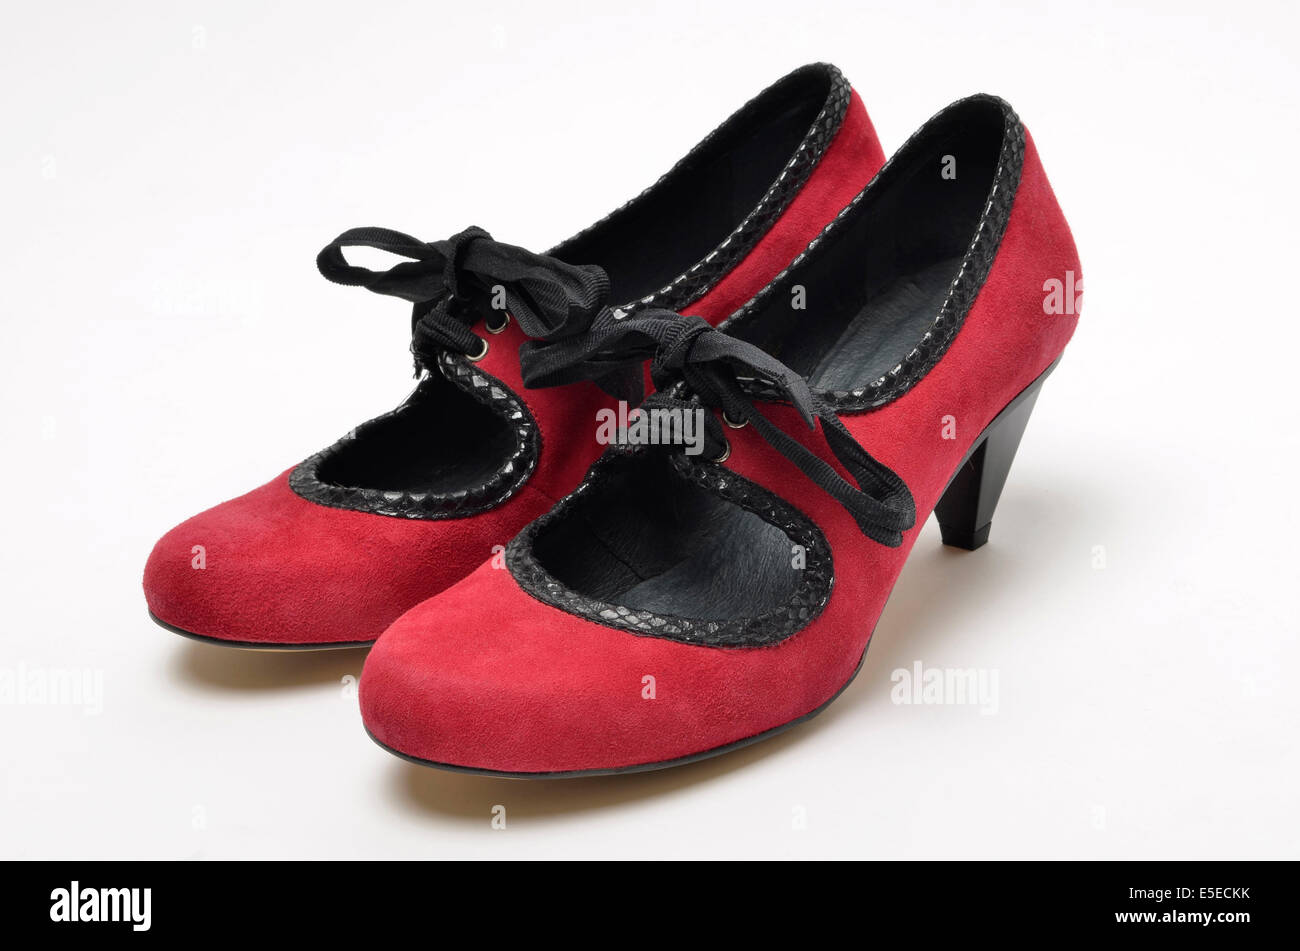 Red retro style suede shoes by Topshop Stock Photo